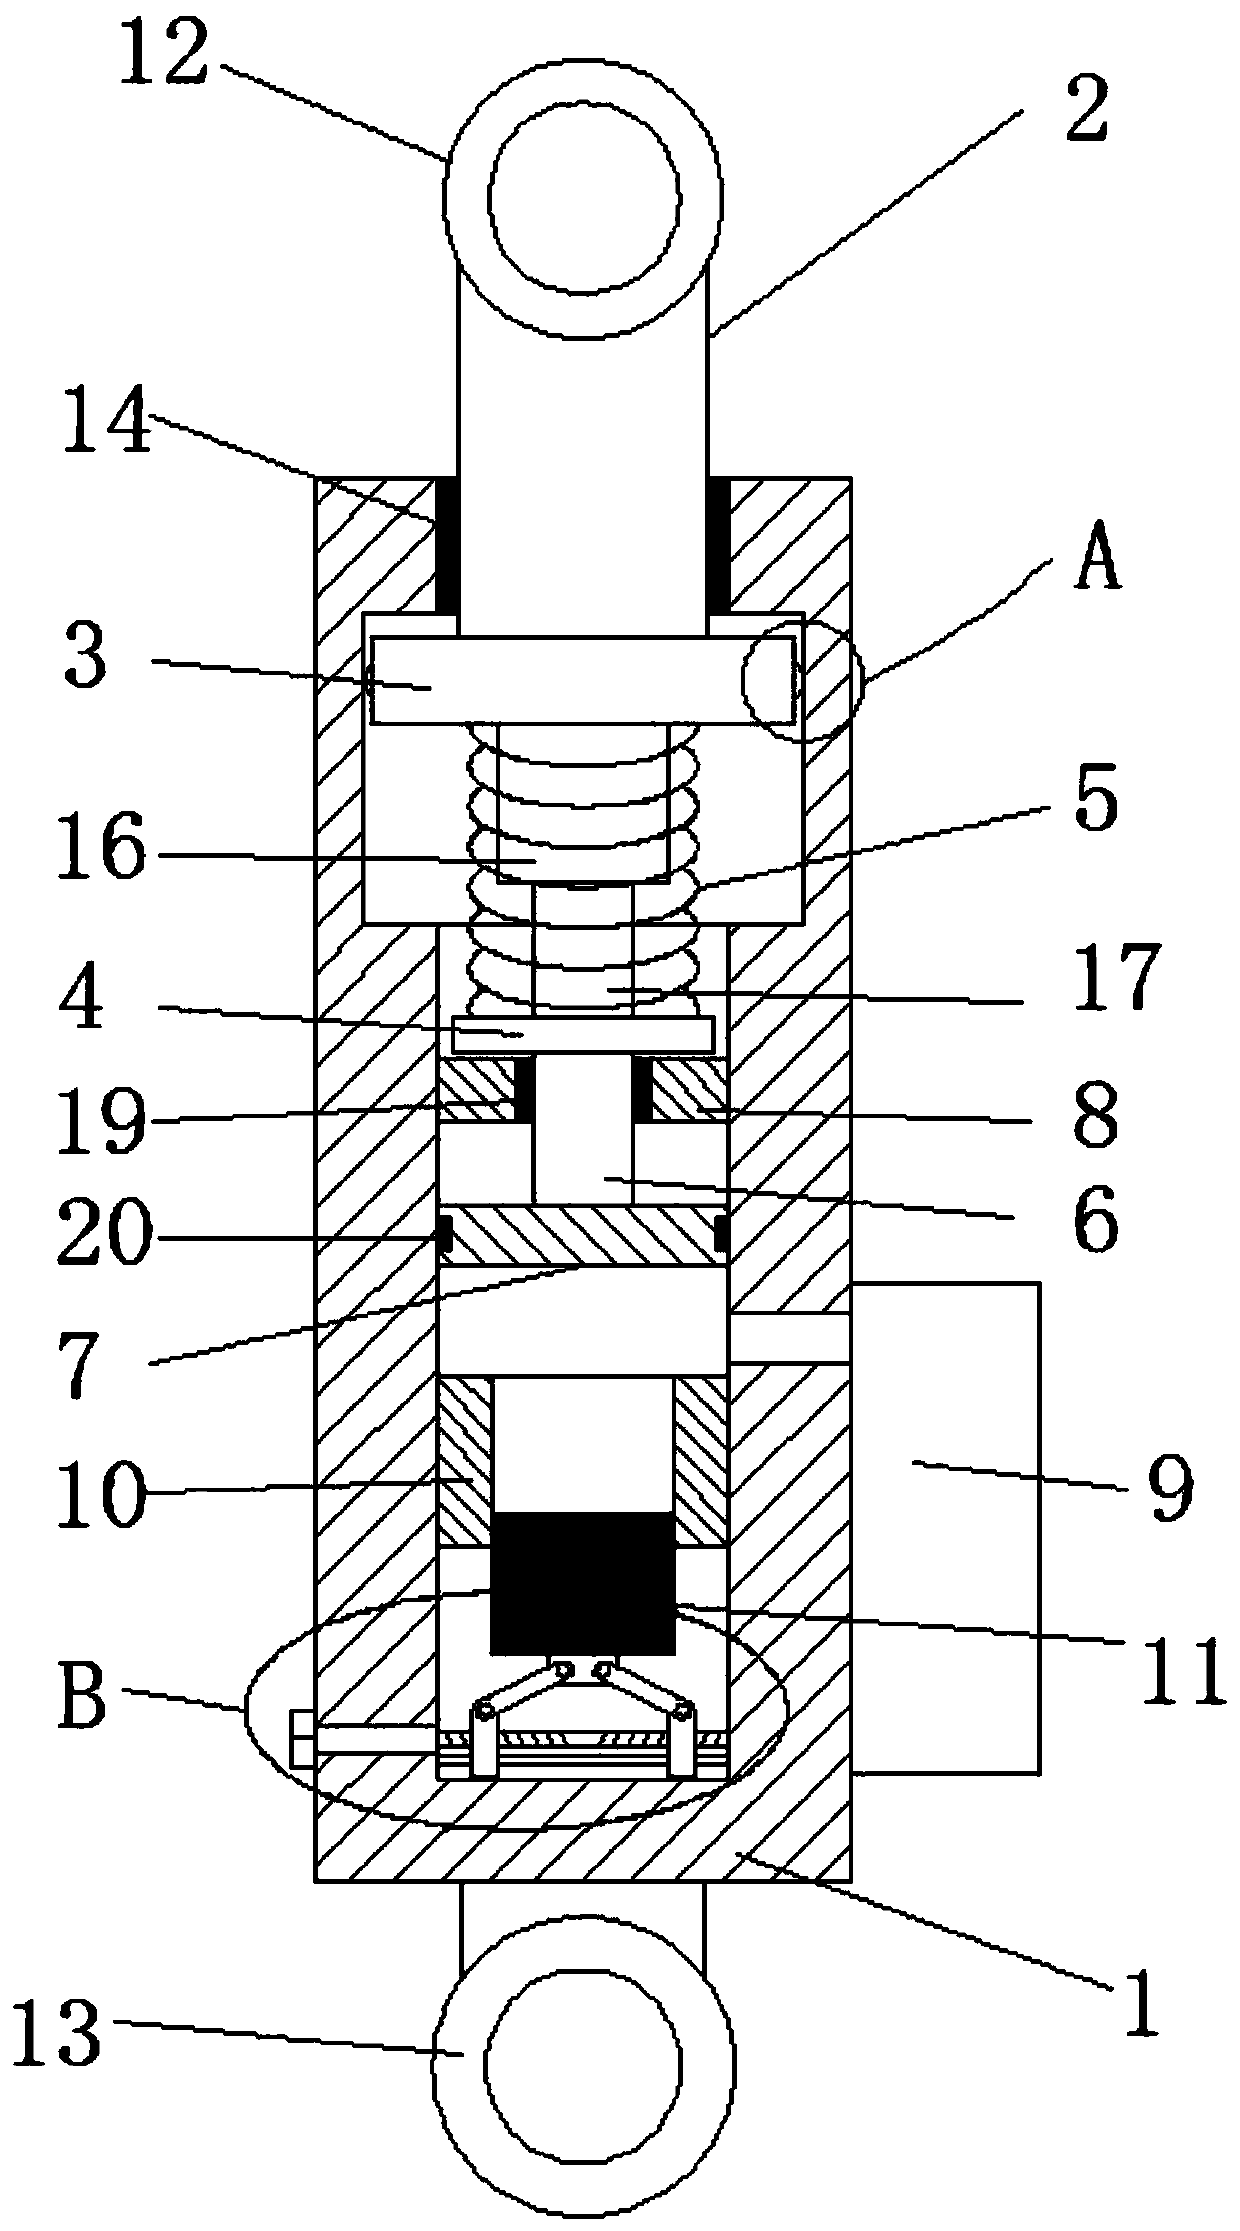 Automobile automatic variable damping shock absorber based on linear damping model